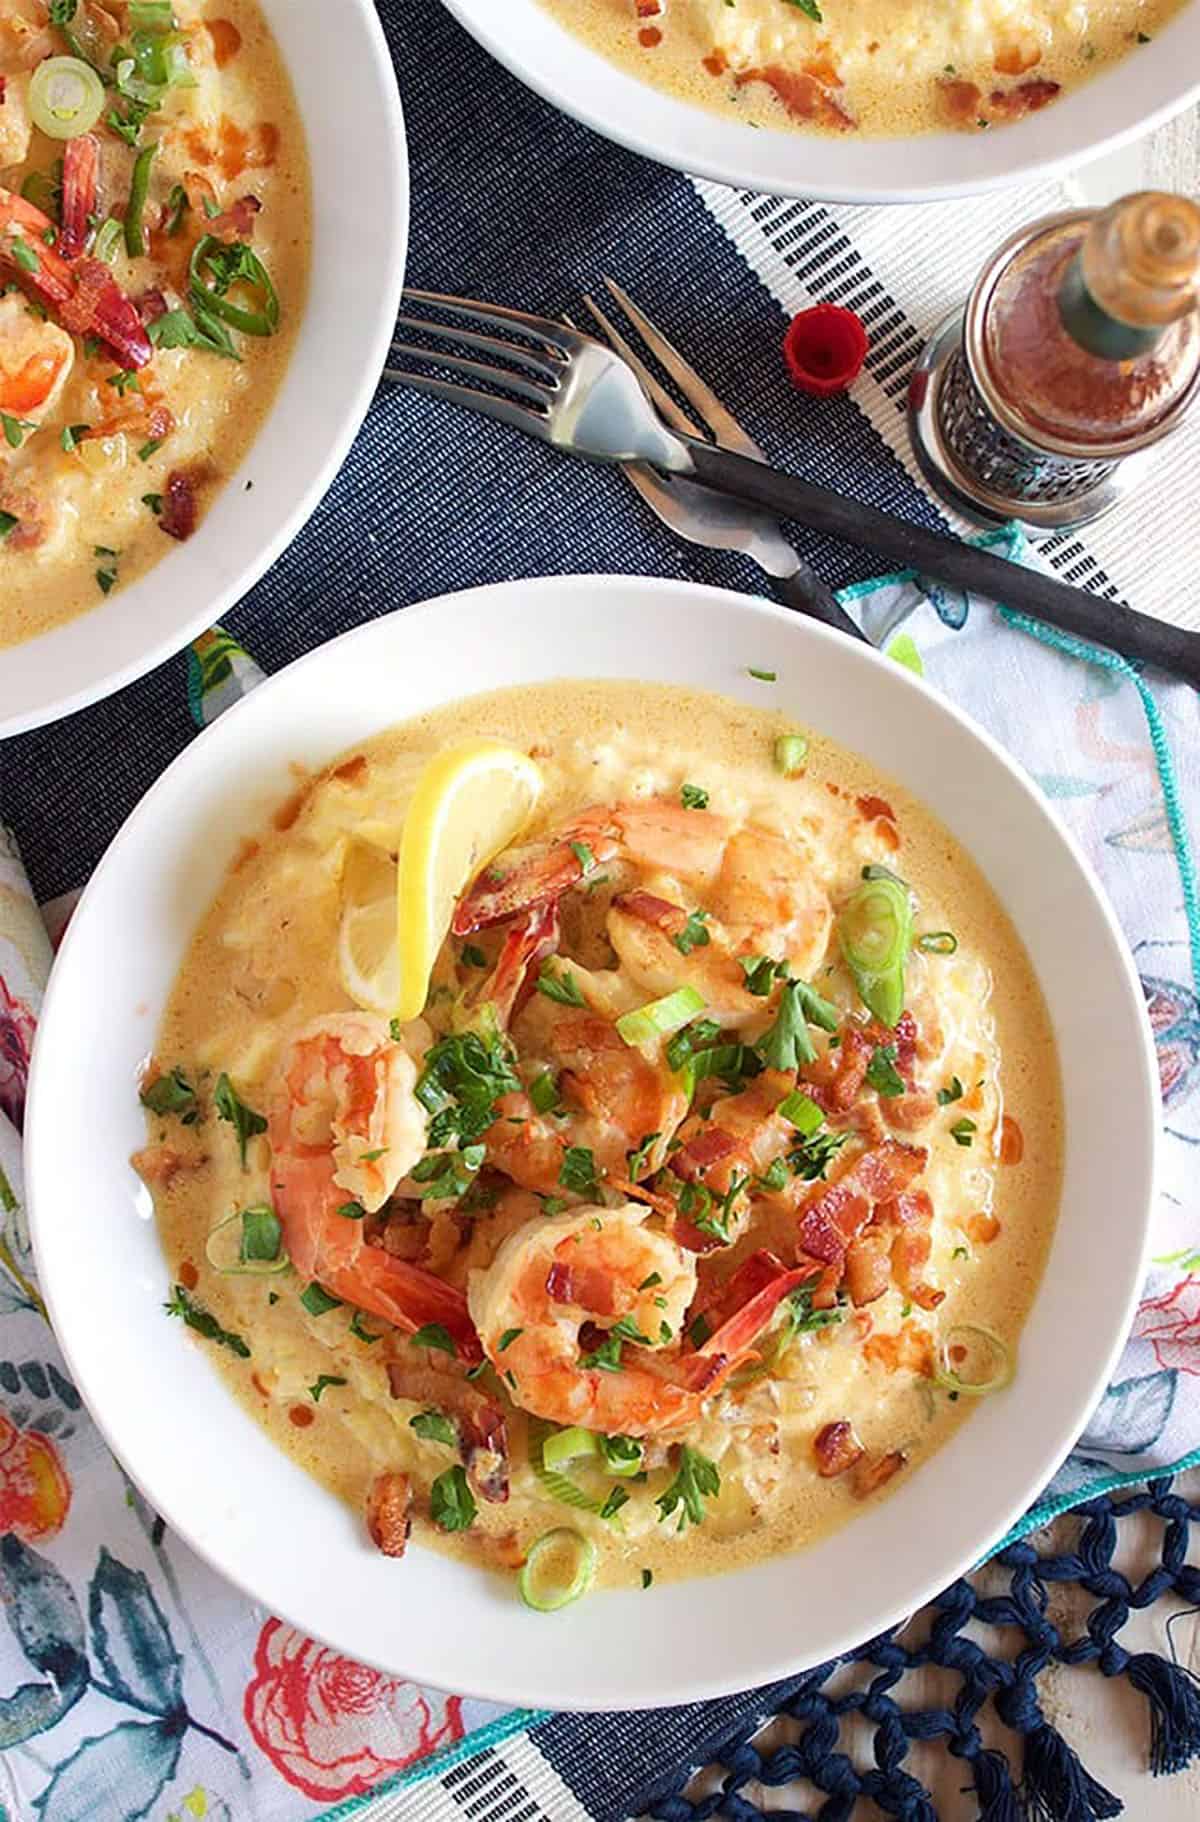 shrimp and grits in a white bowl on a blue and white place mat.